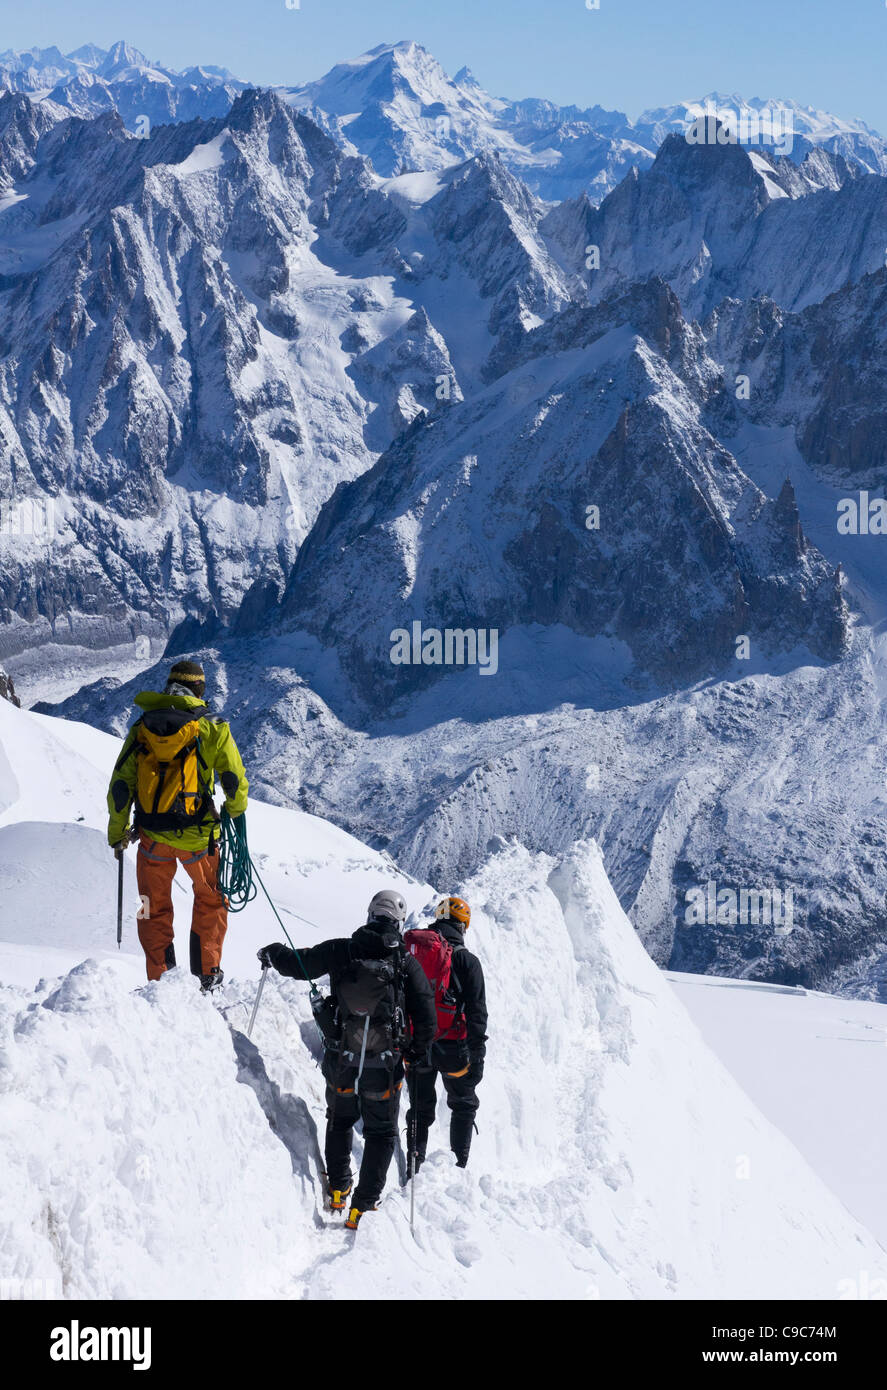 A mountain guide leads two mountaineers along the arete leading from the summit of the Aiguille du Midi Stock Photo